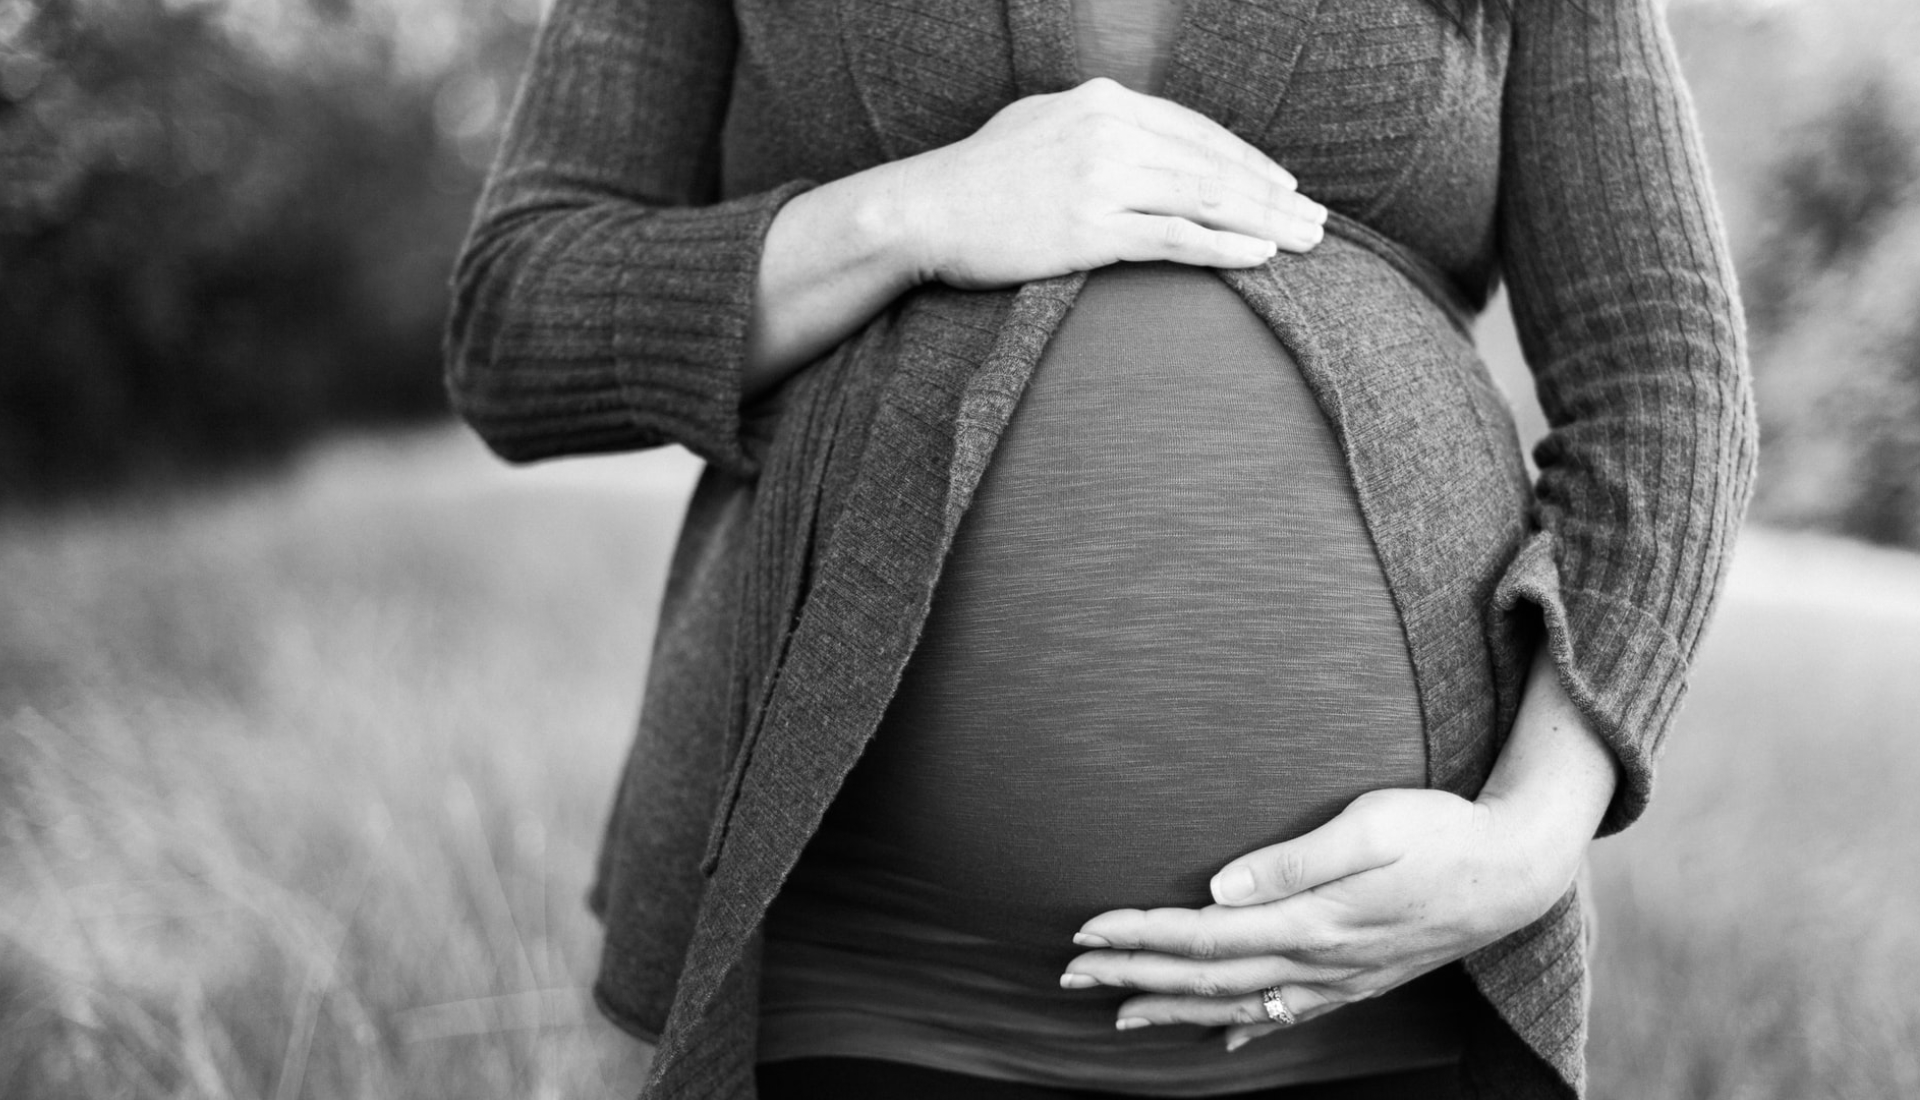 Alcohol consumption during pregnancy affects the child's kidney function, years later